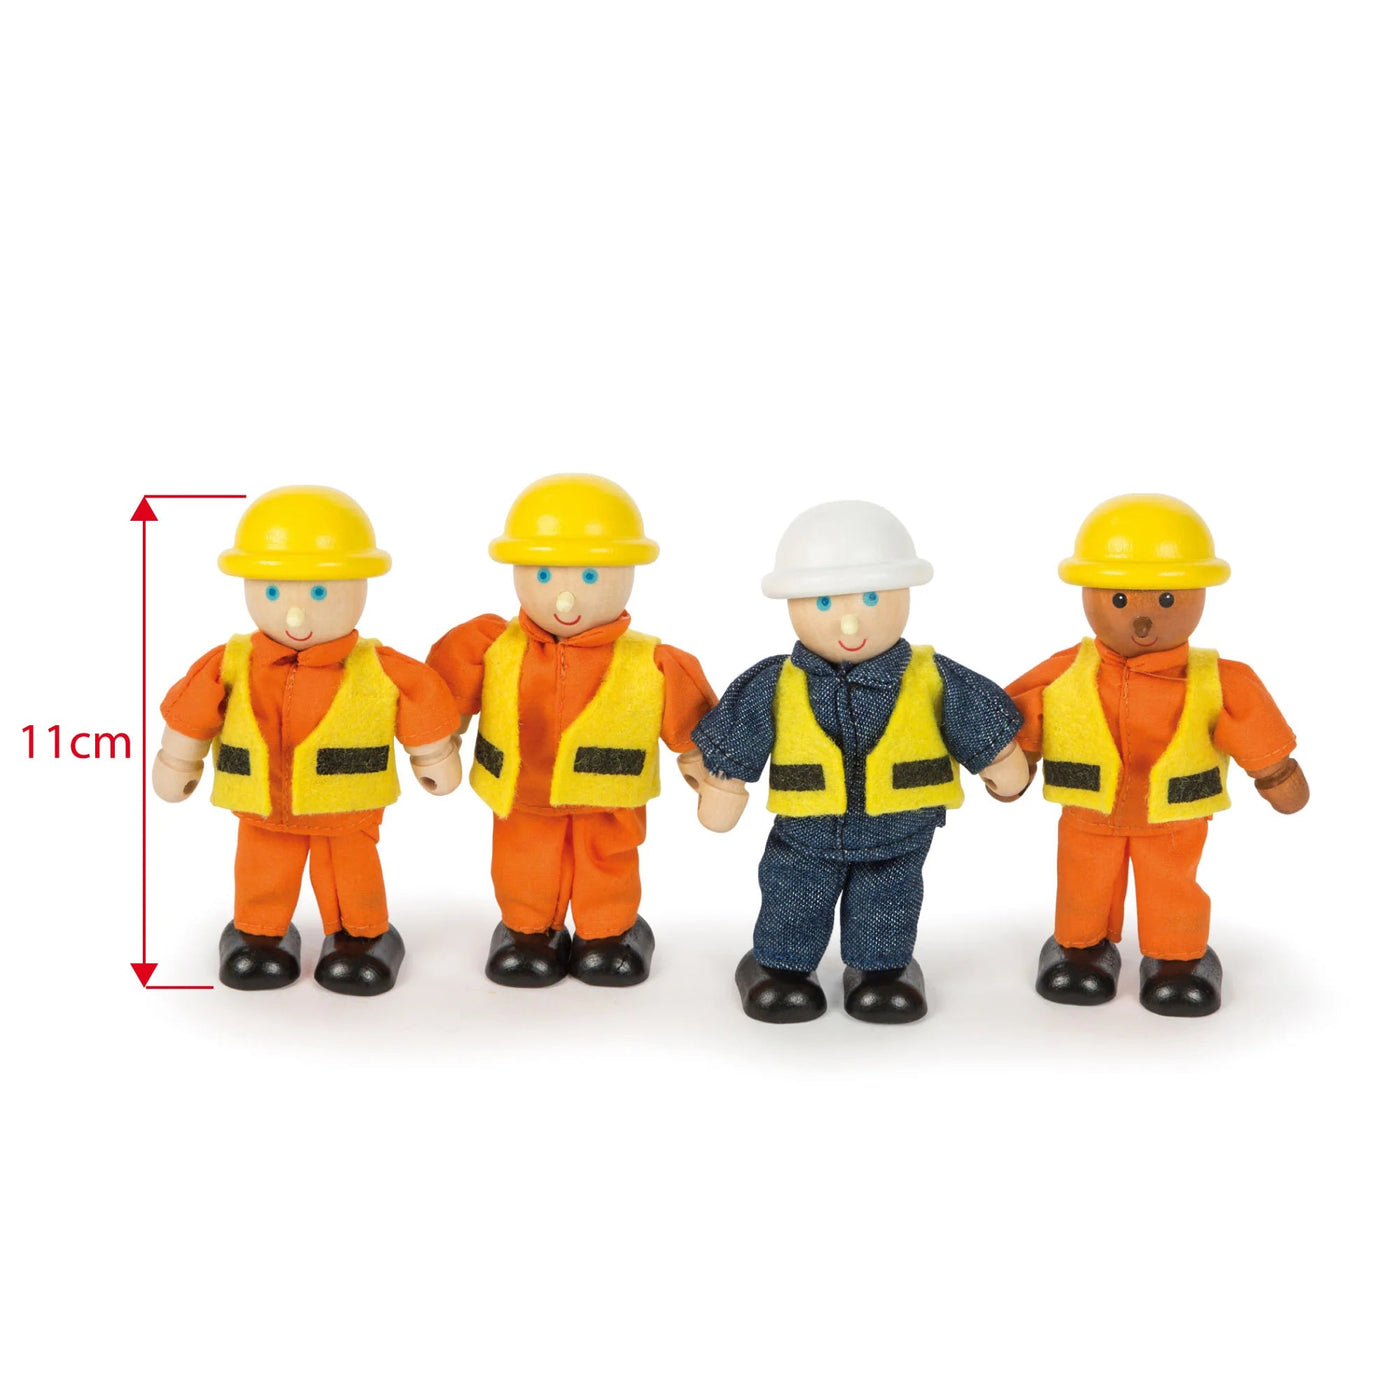 Bigjigs Toys Construction Workers